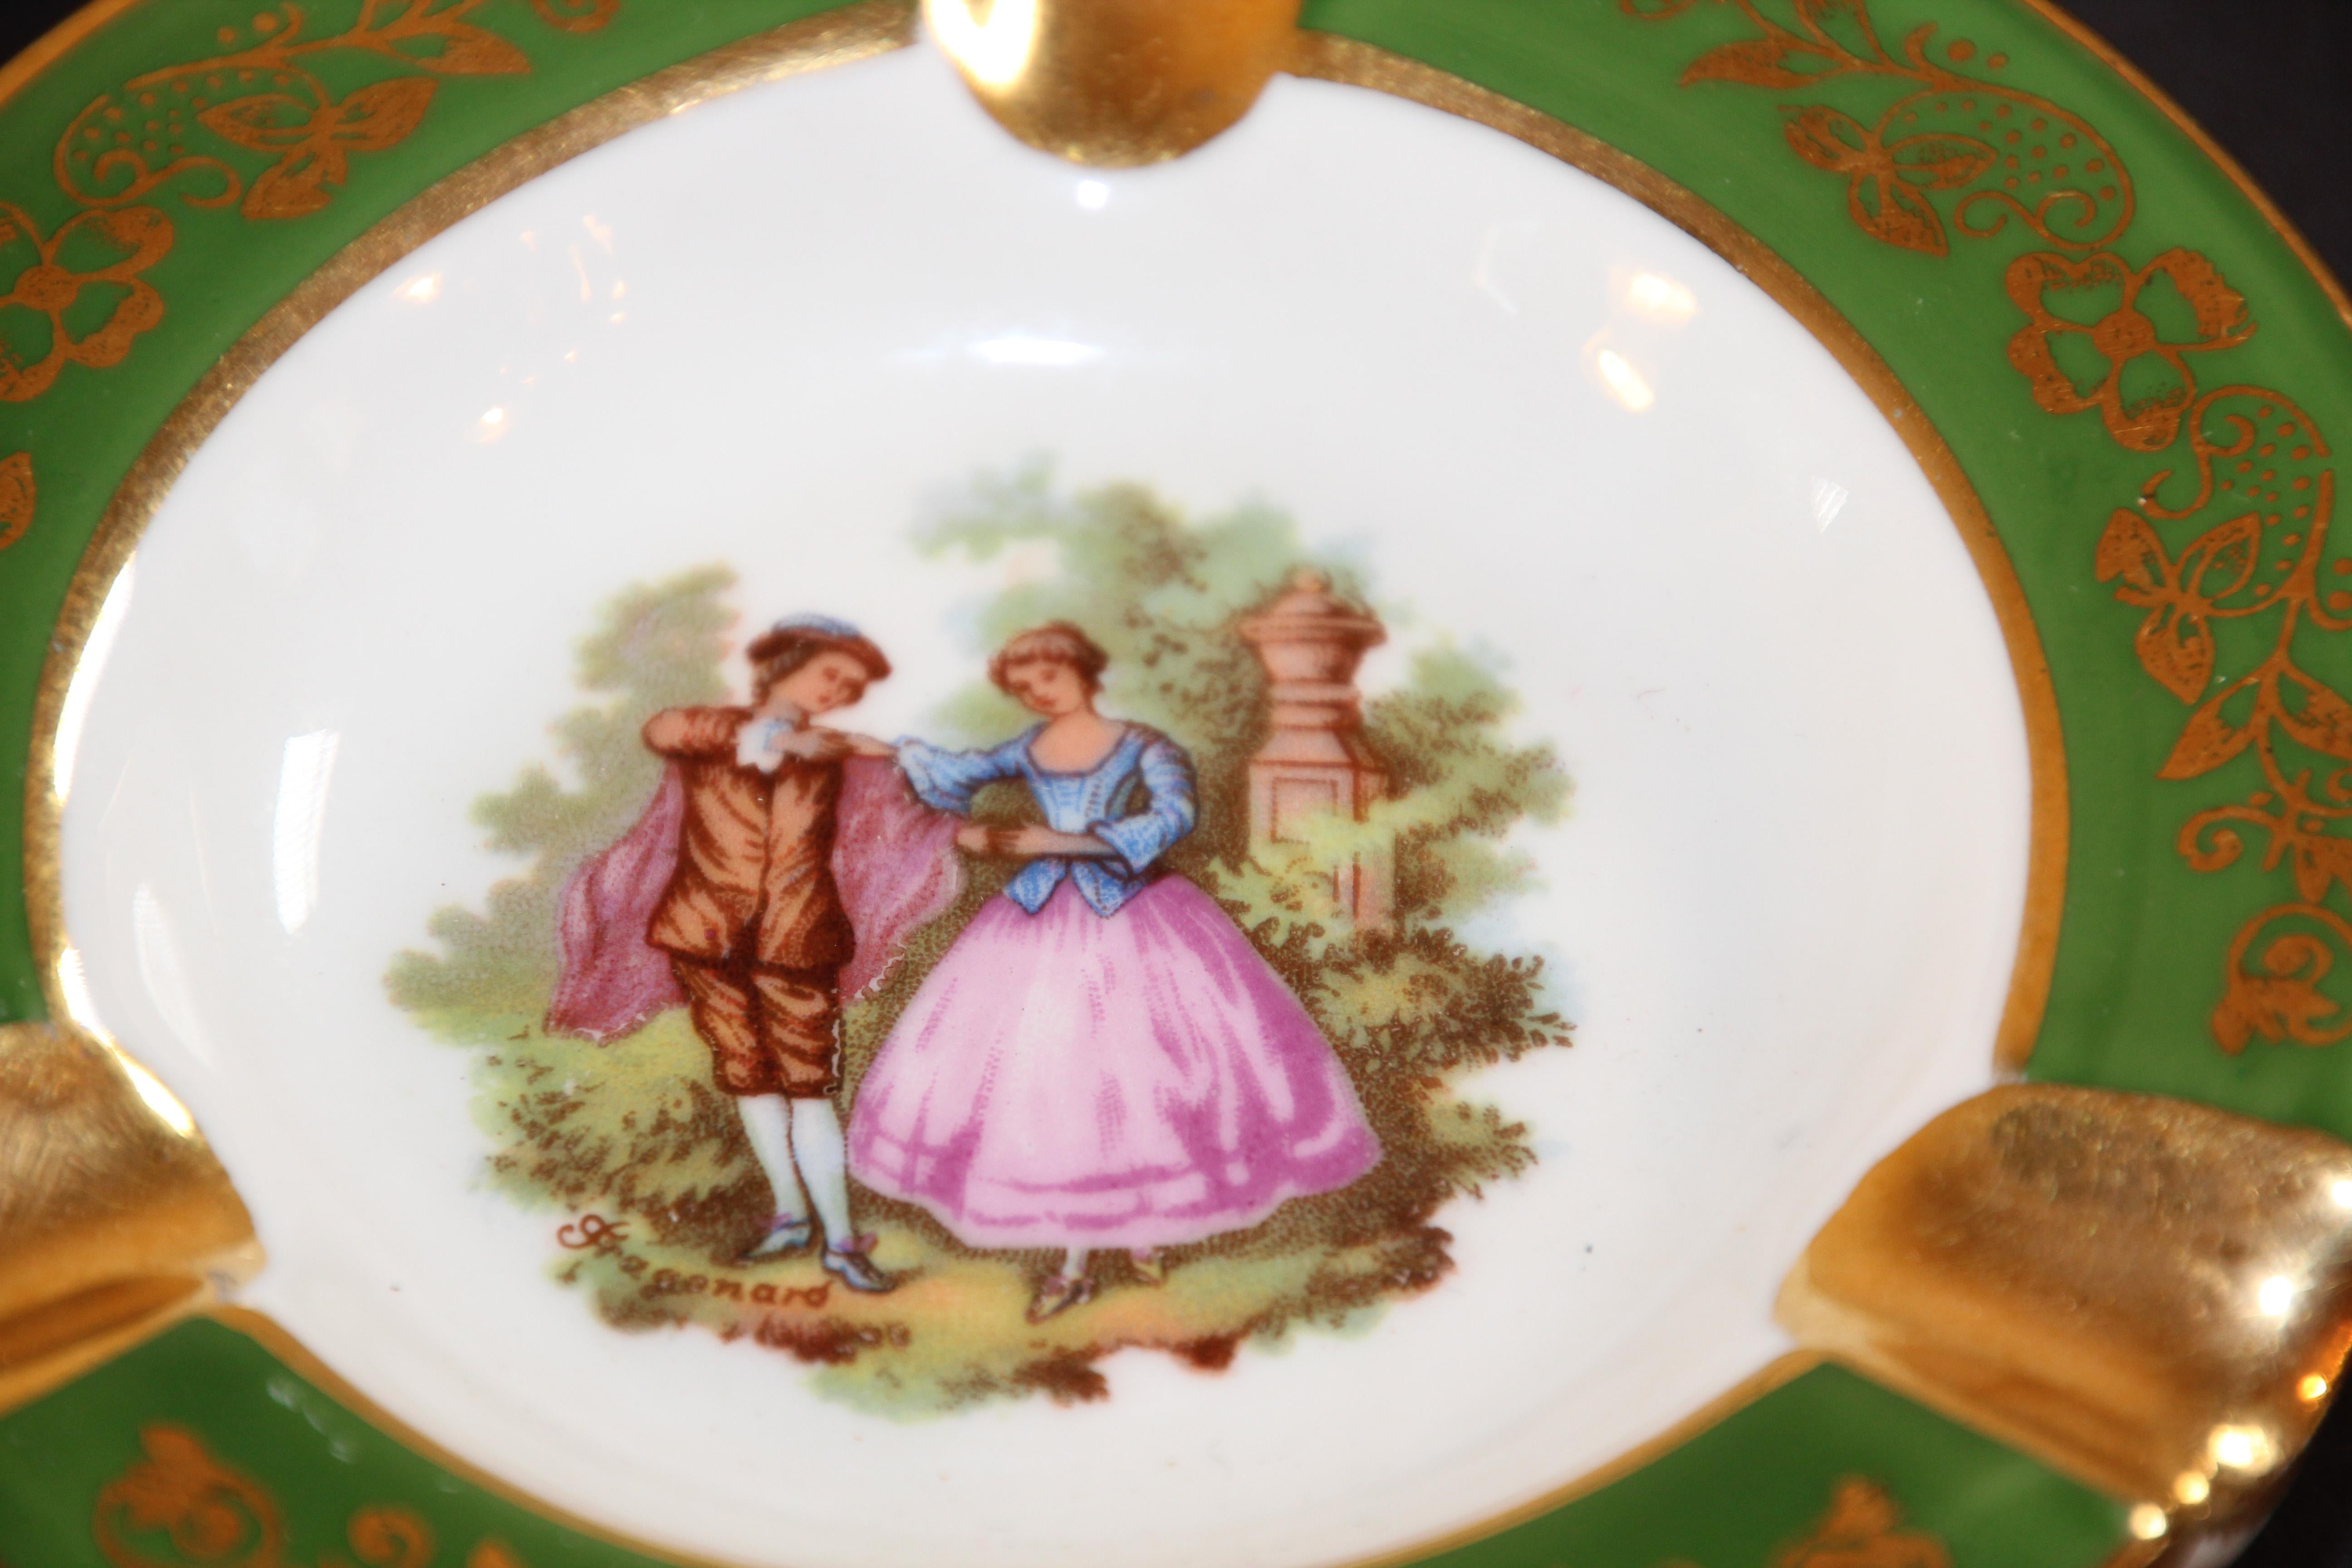 Vintage limoges France porcelain round ashtray green and gold.
Elegant precious porcelain ashtray hand painted with a scene of a couple in the style of Fench artist Fragonard.
Use it as an ashtray or for decorative accent.
Limoges made in France